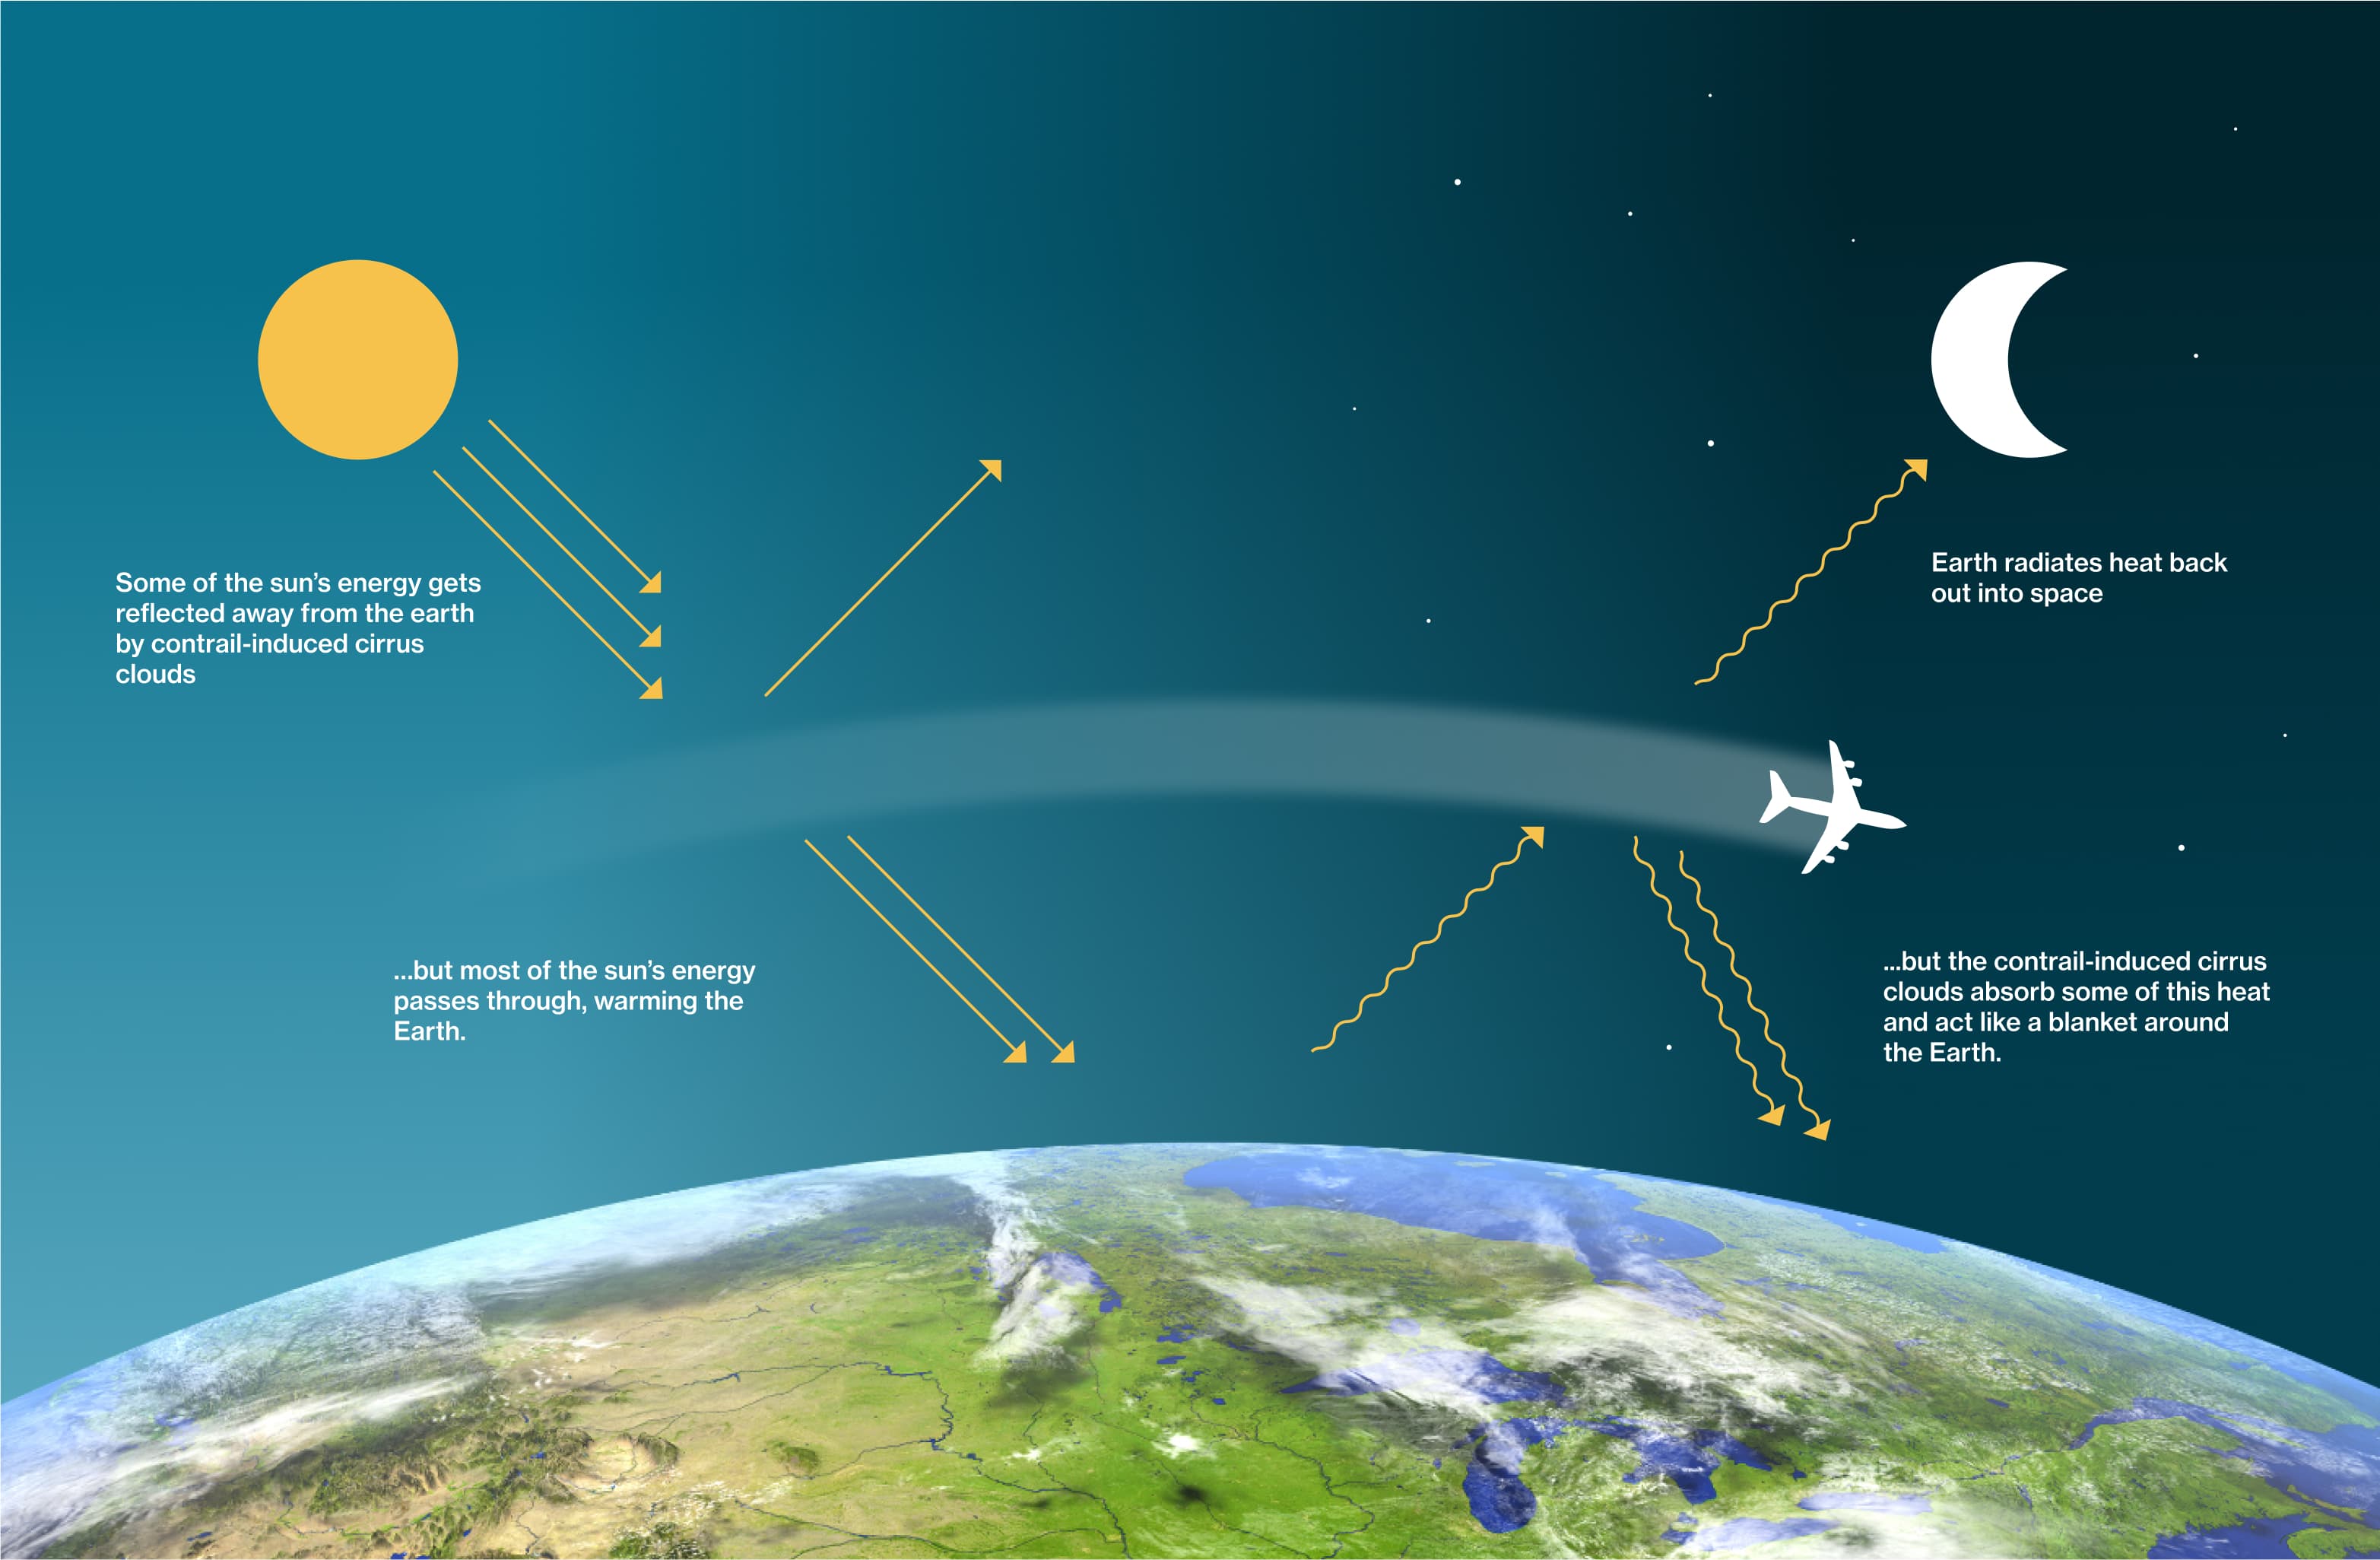 An illustration of warm air being trapped into the atmosphere by the contrail of a plane with the following text: Some of the sun's energy gets reflected away from the Earth by contrail-induced cirrus clouds…but most of the sun's energy passes through, warming the Earth. At night, the earth radiates heat back out into space…but the contrail-induced cirrus clouds absorb some of this heat and act like a blanket around the Earth.